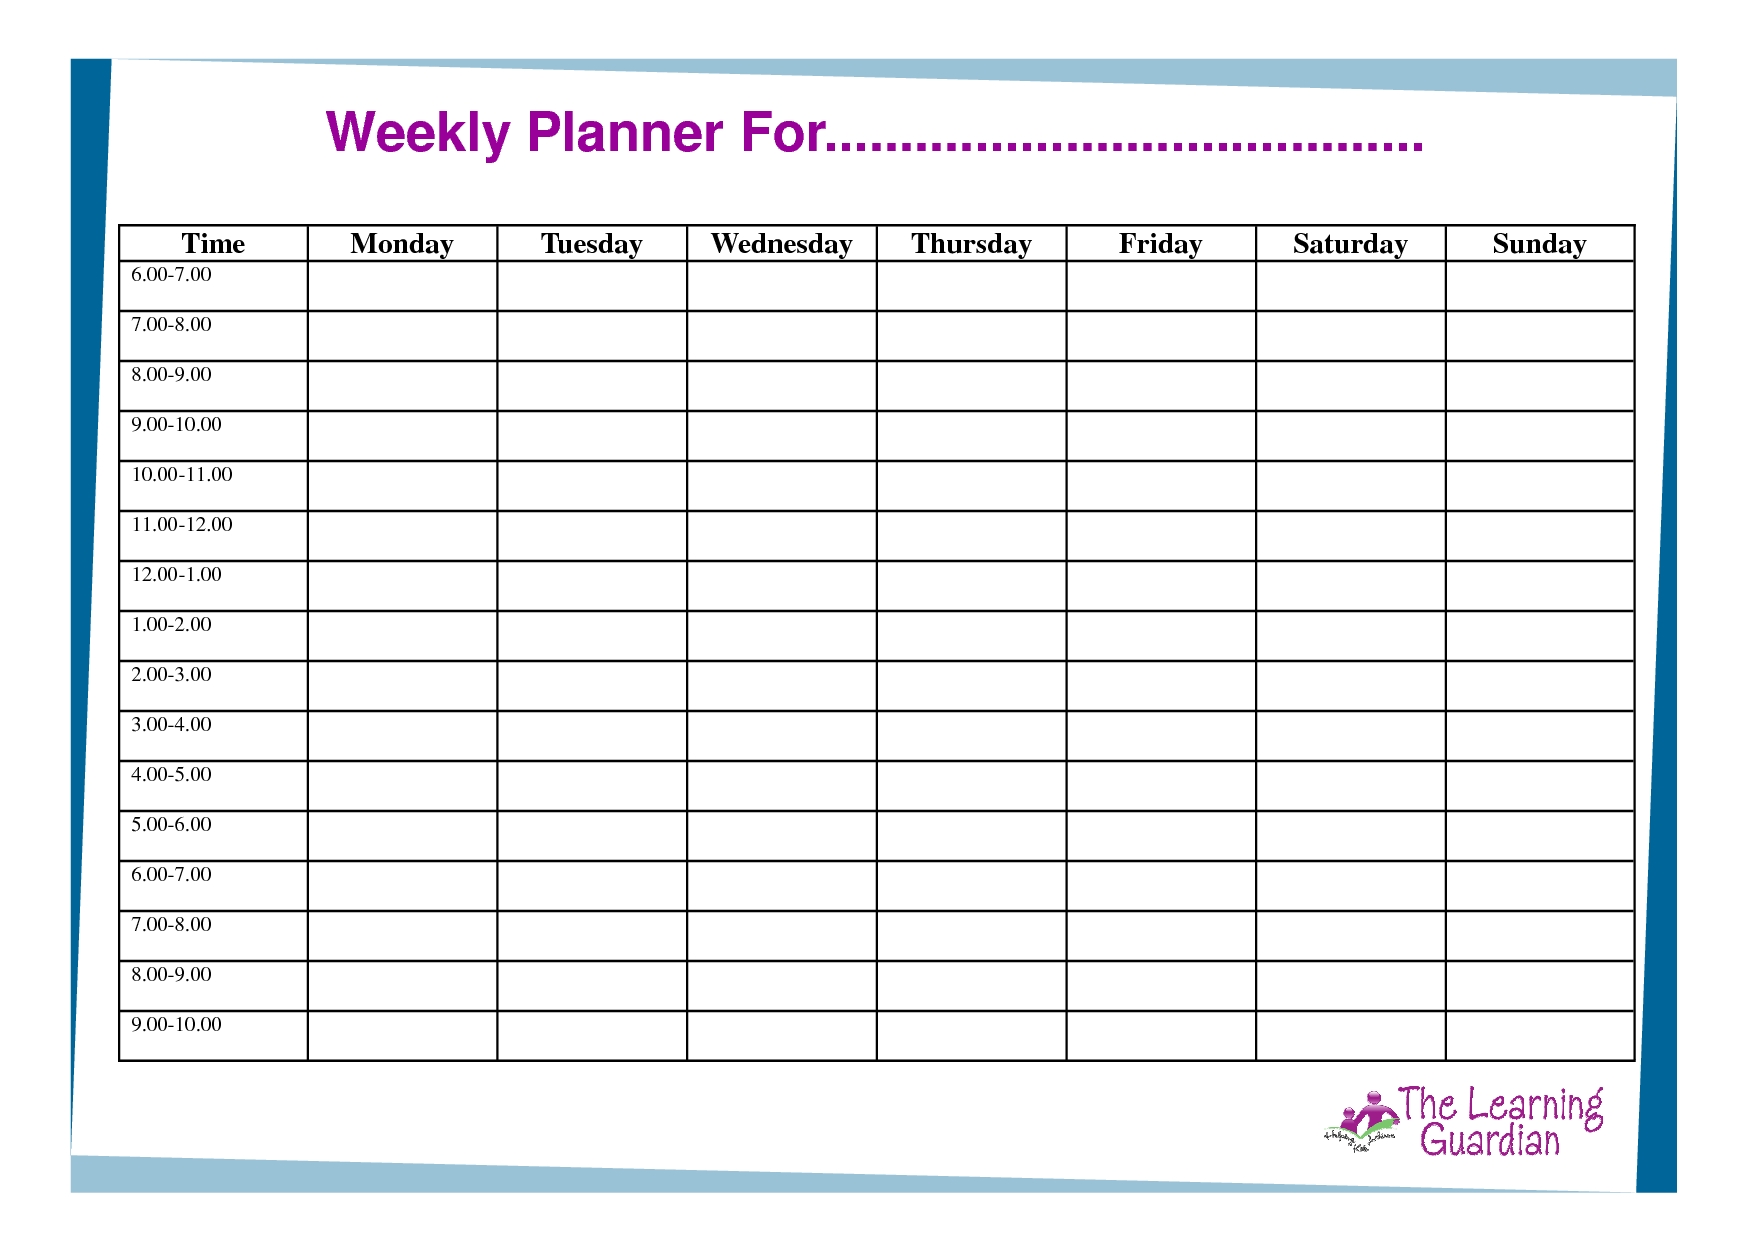 Free Printable Weekly Calendar Templates | Weekly Planner For Time with Free Printable Calendar Monday Through Friday With Notes